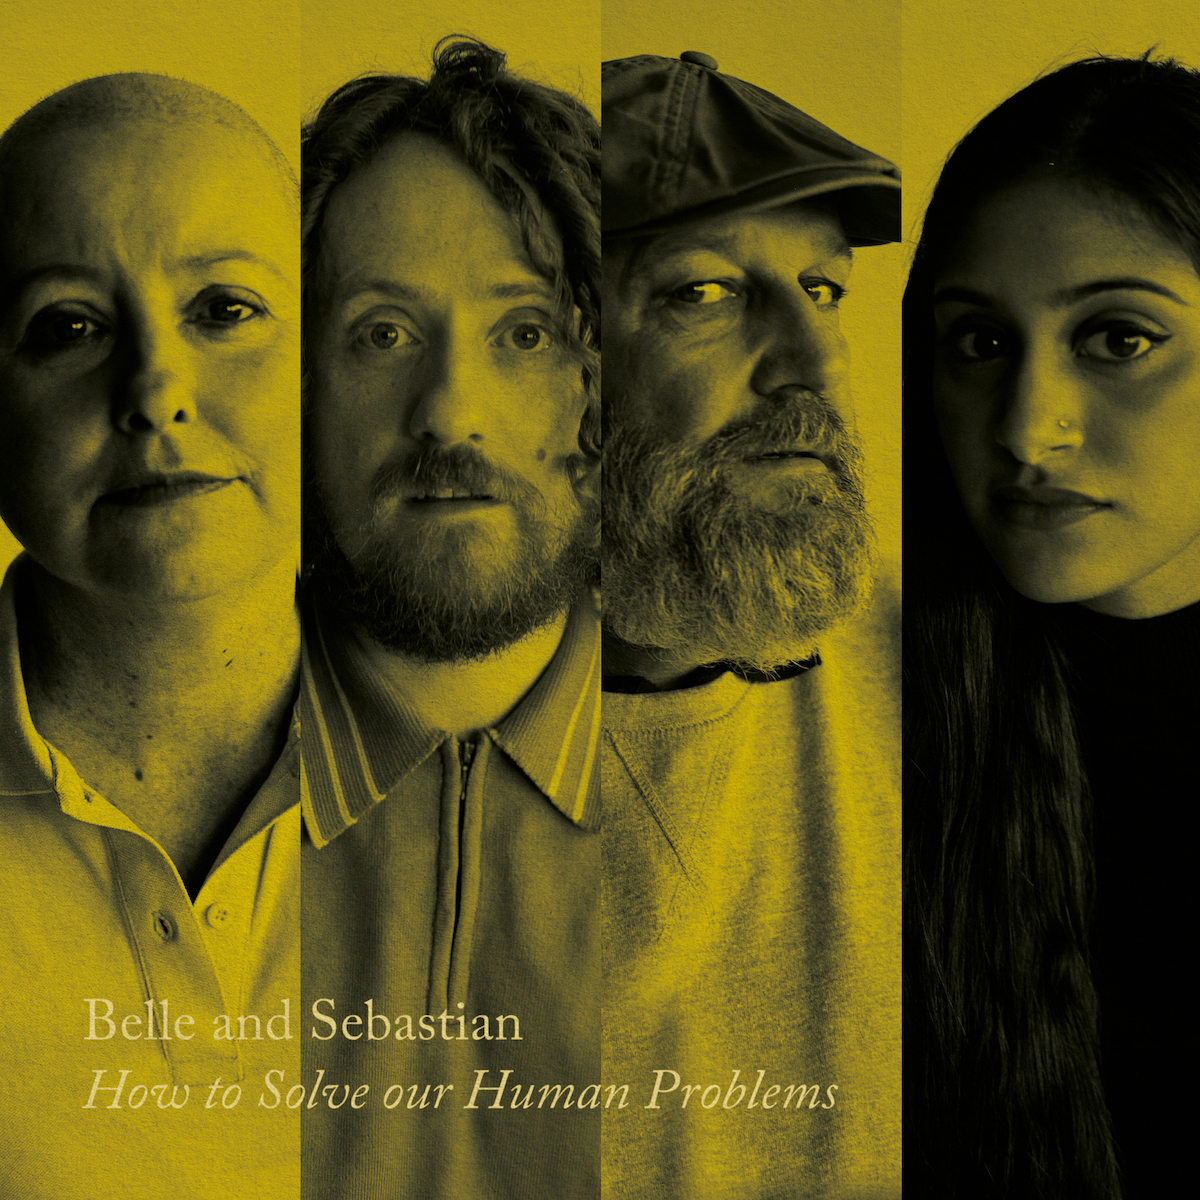 Belle and Sebastian Announce <i>How to Solve Our Human Problems</i> EP Trilogy, Release “I’ll Be Your Pilot”” title=”4000x4000px_EP2Cover-copy-1507641790″ data-original-id=”261743″ data-adjusted-id=”261743″ class=”sm_size_full_width sm_alignment_center ” data-image-source=”getty” />
<img src=